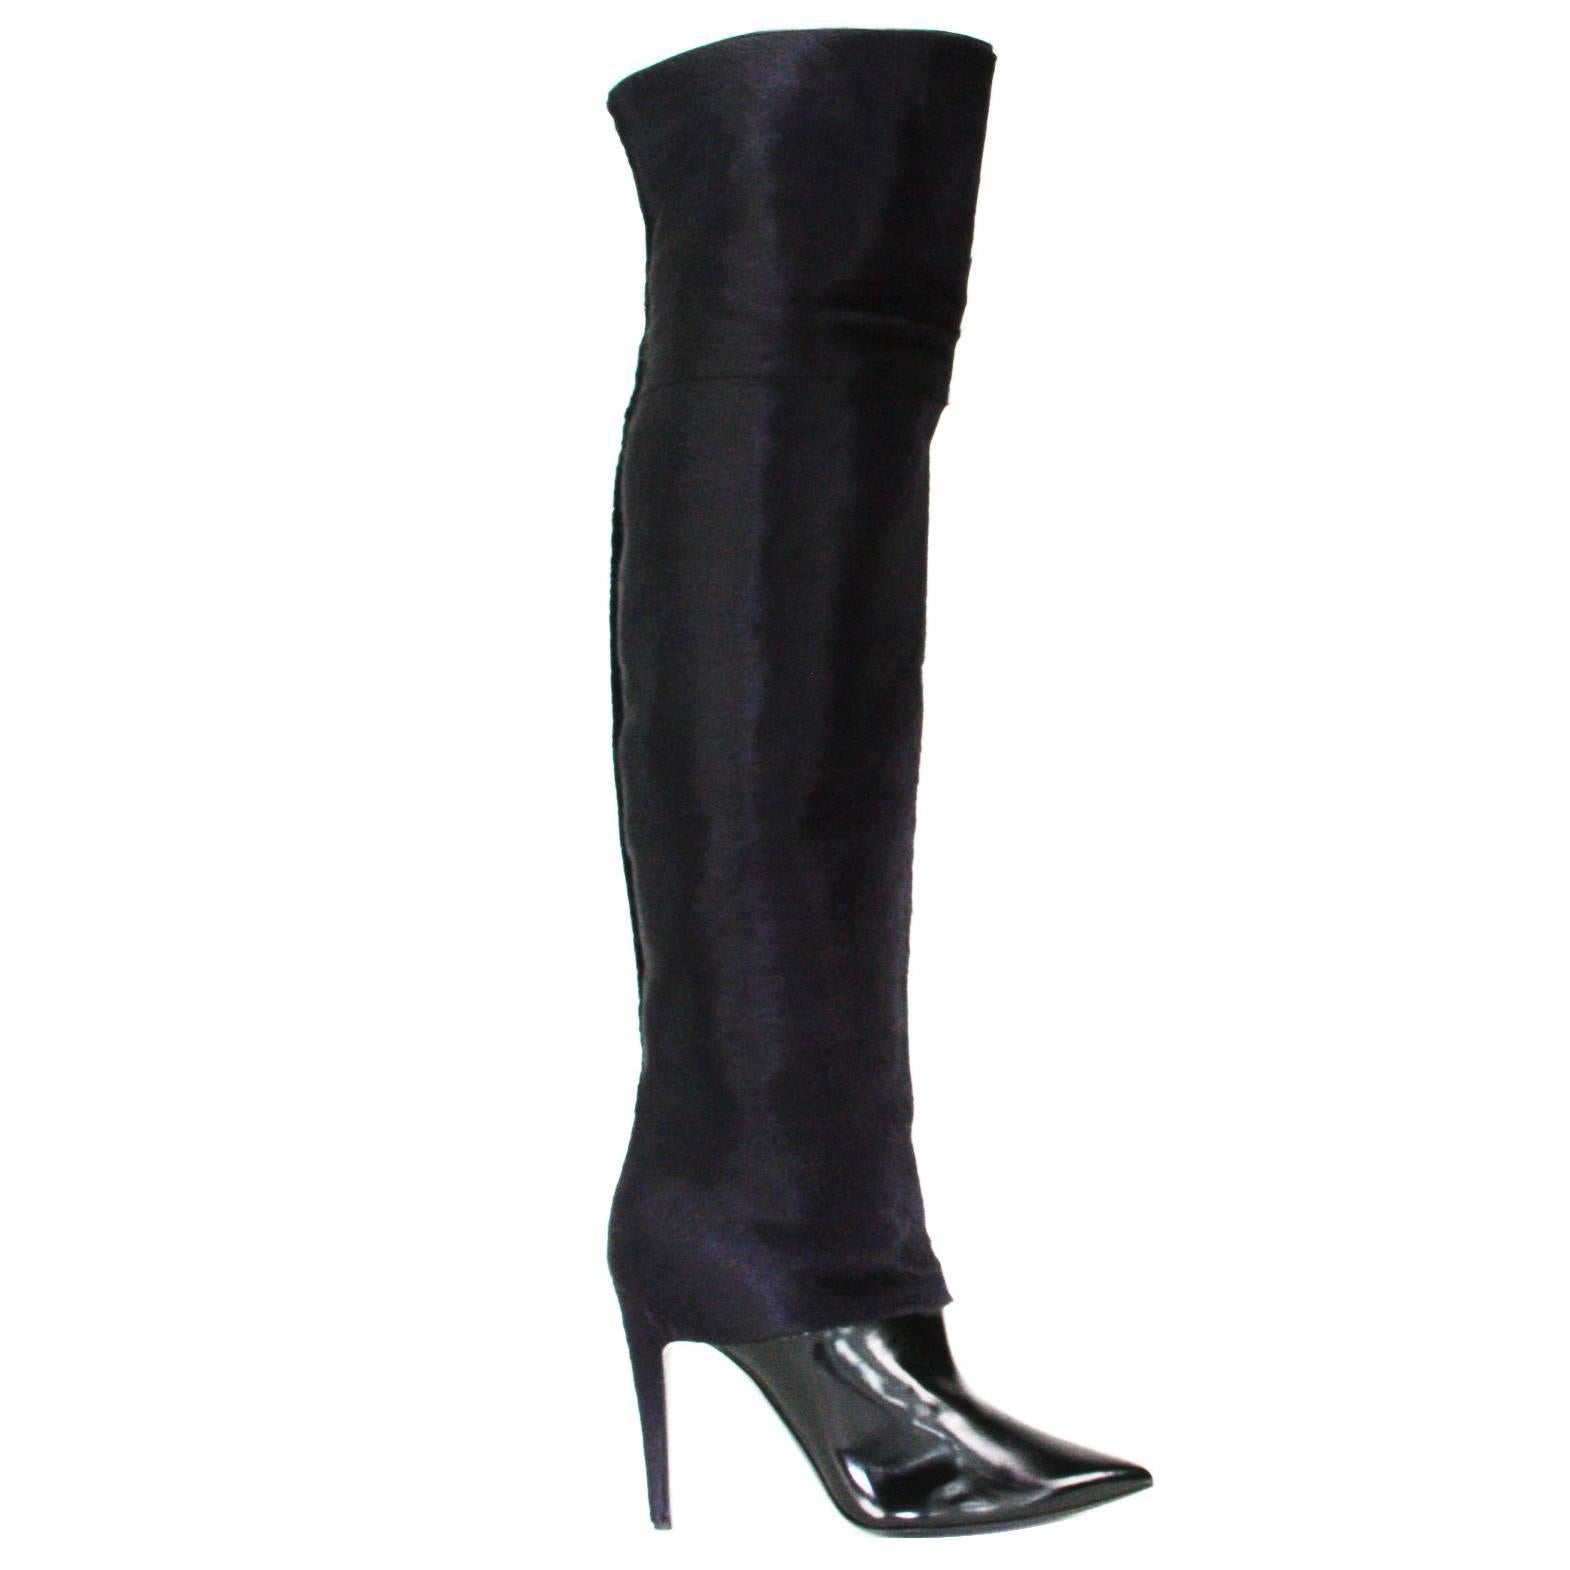 New PIERRE HARDY Italy Pony-Hair Over the Knee Leather Boots It. 39.5 - US 9 For Sale